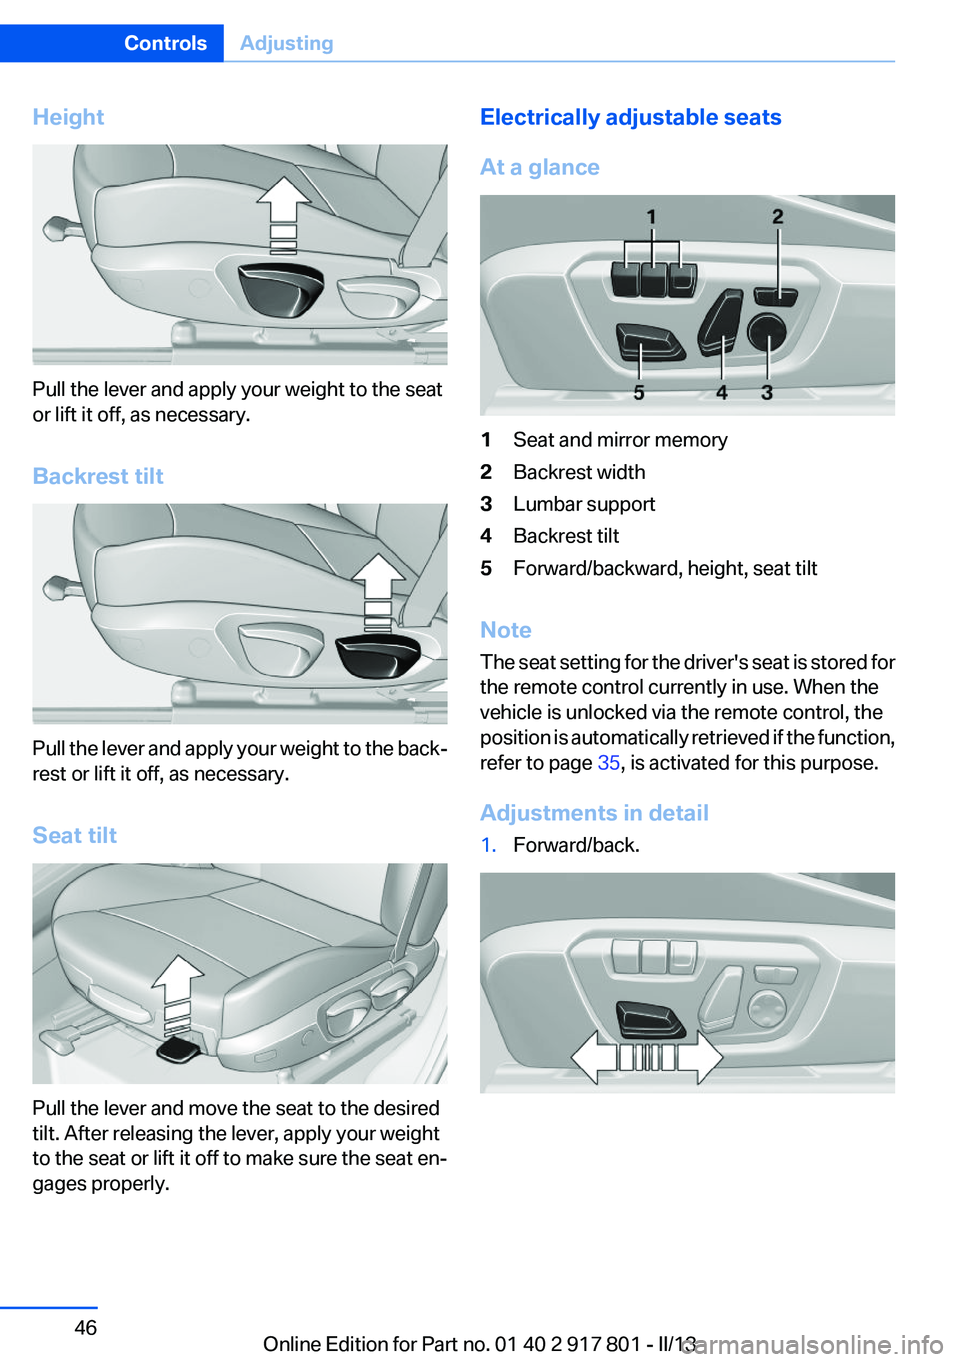 BMW 335I 2013 Service Manual Height
Pull the lever and apply your weight to the seat
or lift it off, as necessary.
Backrest tilt
Pull the lever and apply your weight to the back‐
rest or lift it off, as necessary.
Seat tilt
Pul